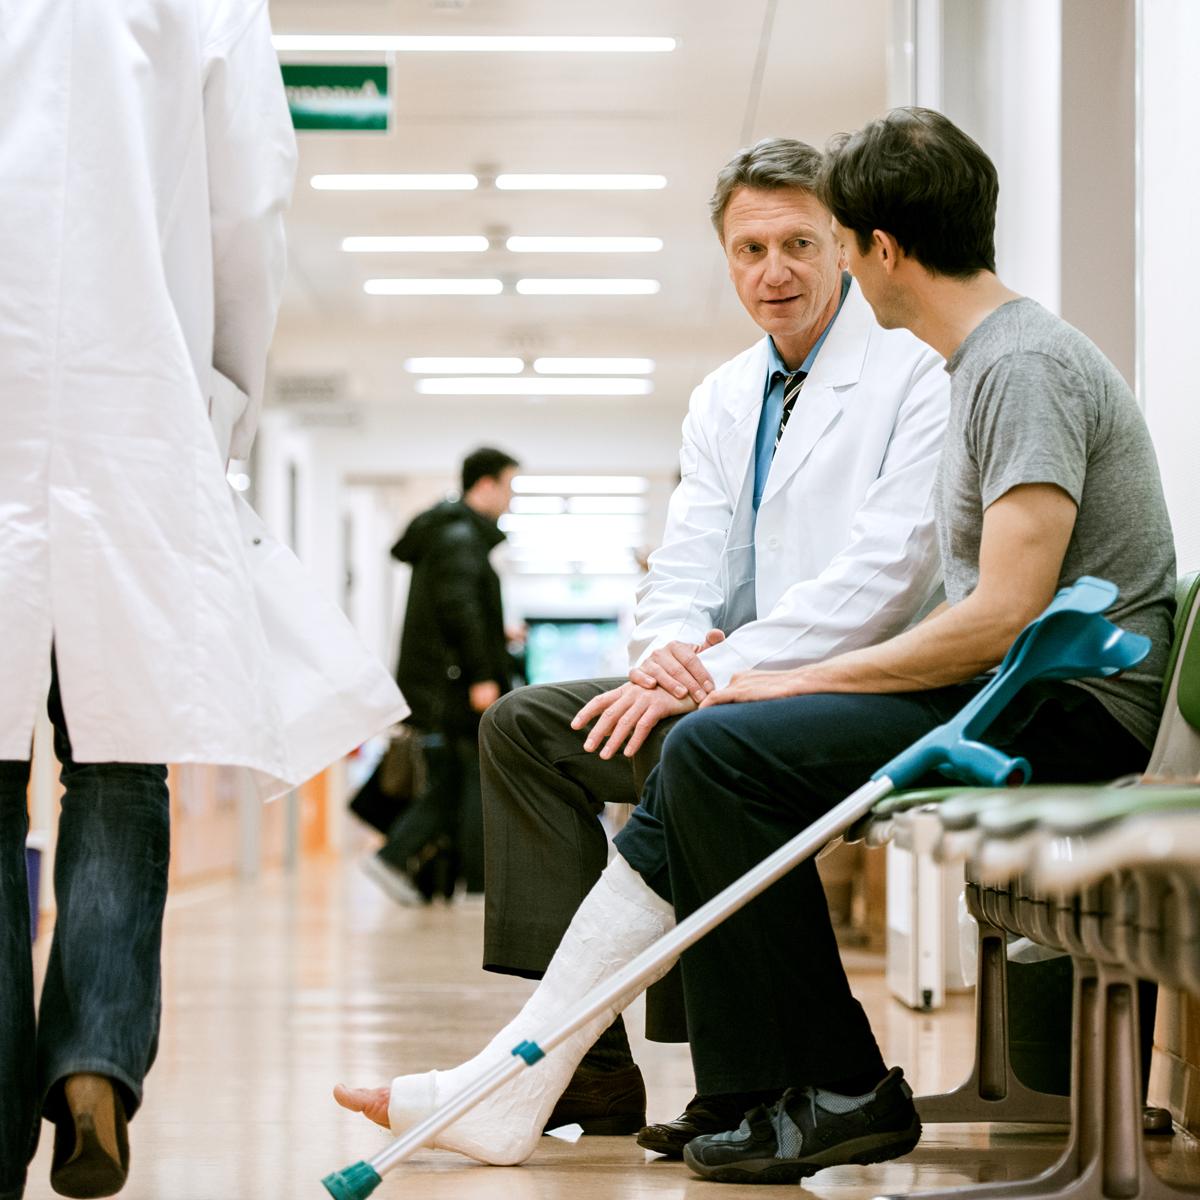 Man with crutches talking to doctor in hospital hallway.